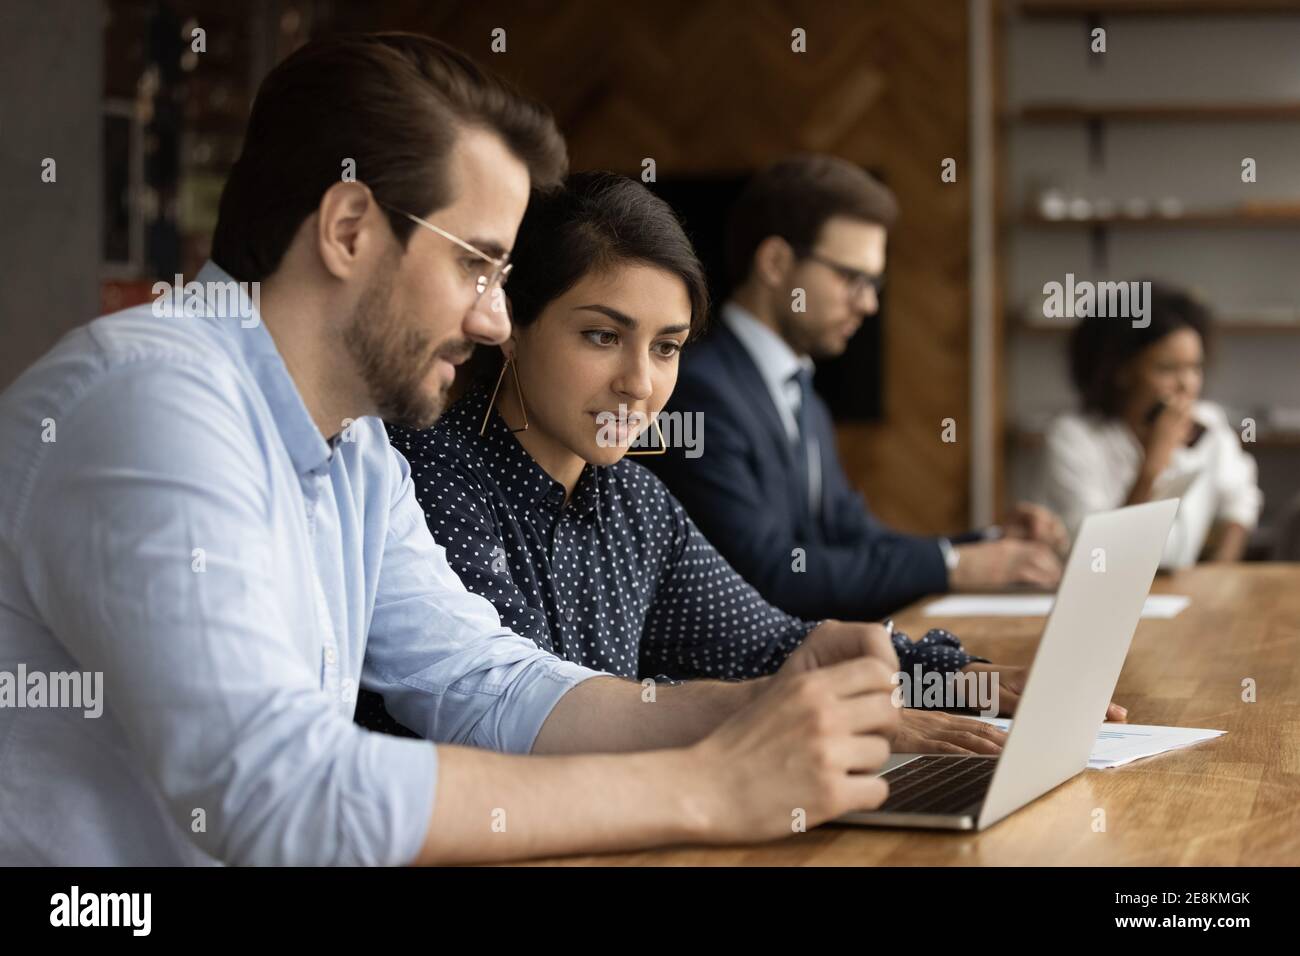 Hindu woman experienced worker help young employee in computer work Stock Photo